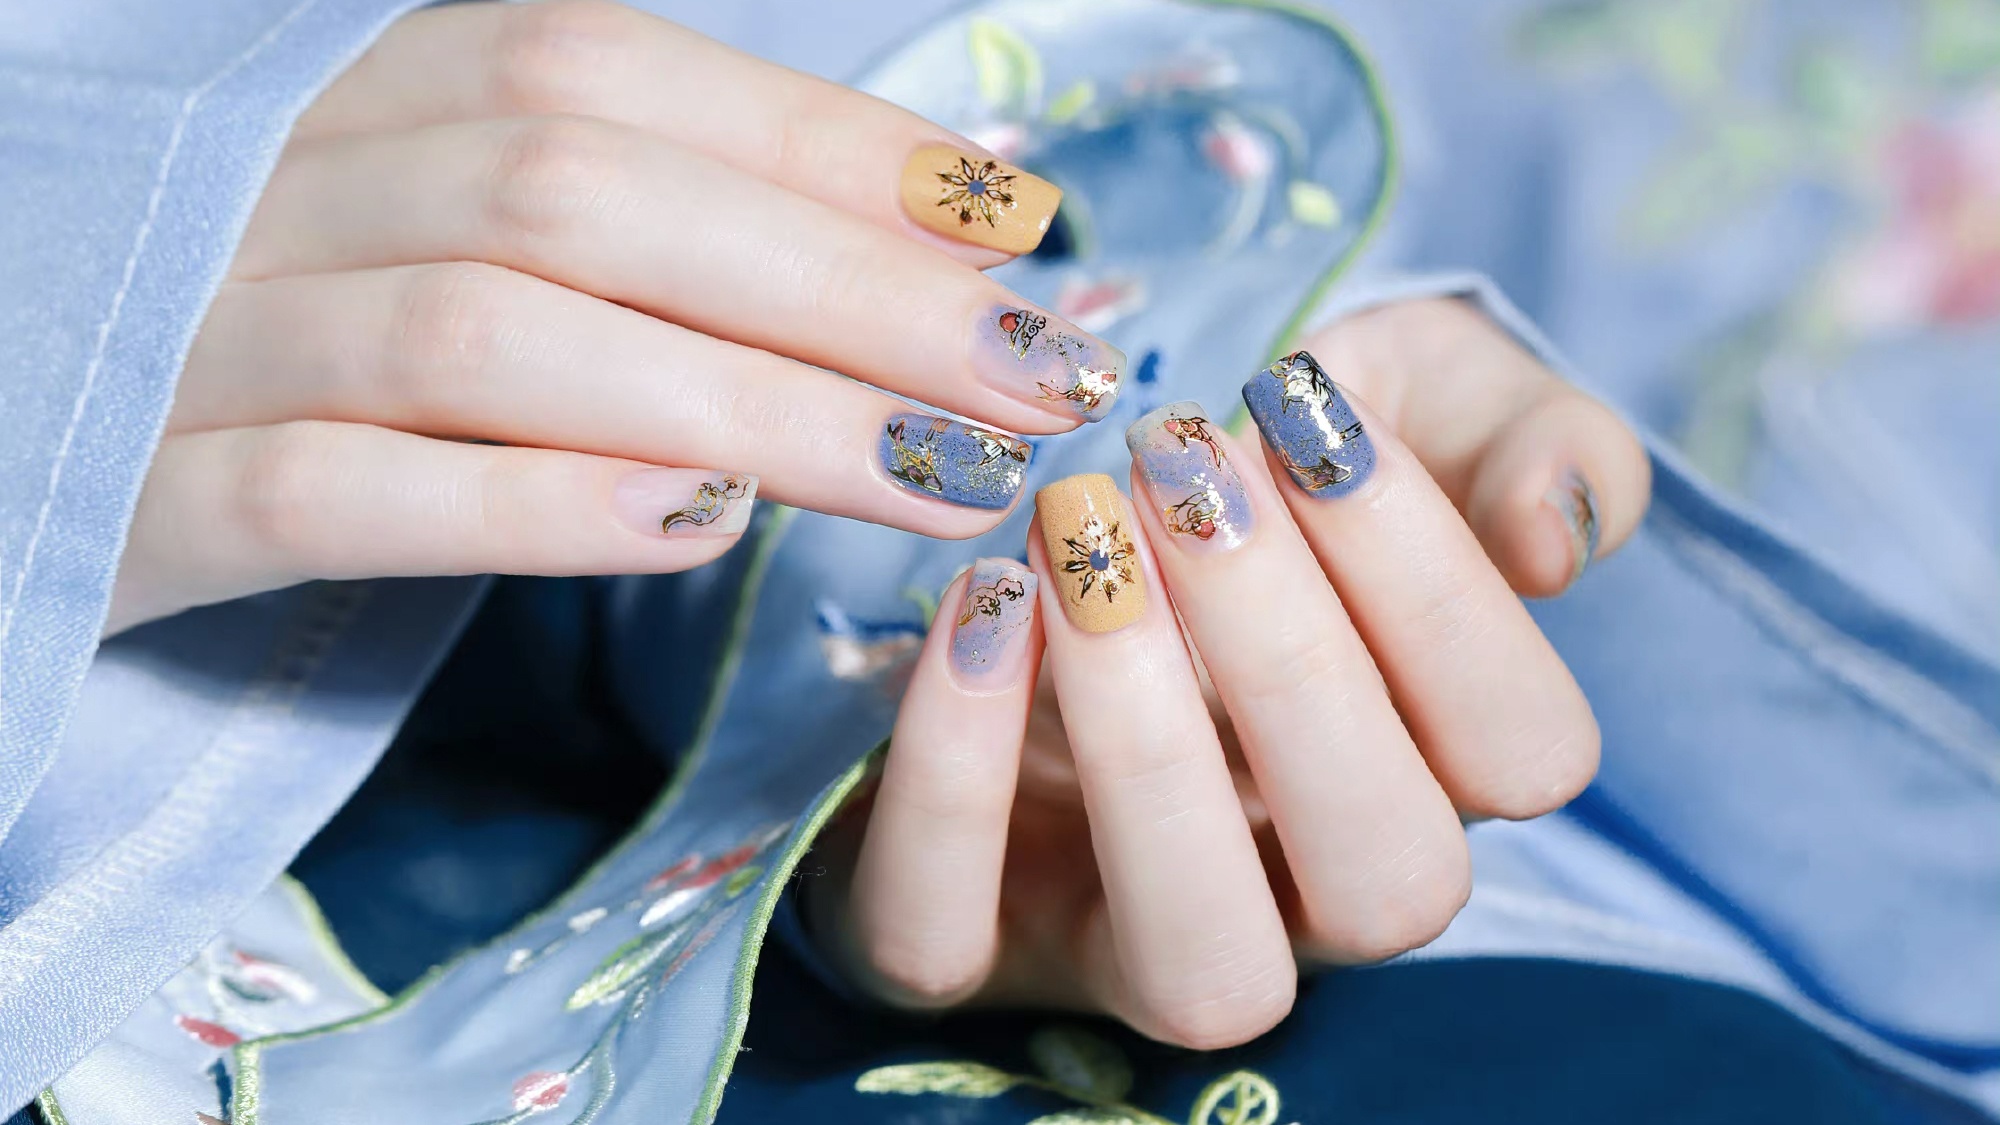 The “Nail Effect” is China's new “Lipstick Index." With younger generations pursuing bolder, personality-imbued nail art, modern C-beauty businesses are making waves. Photo: Miss Candy
